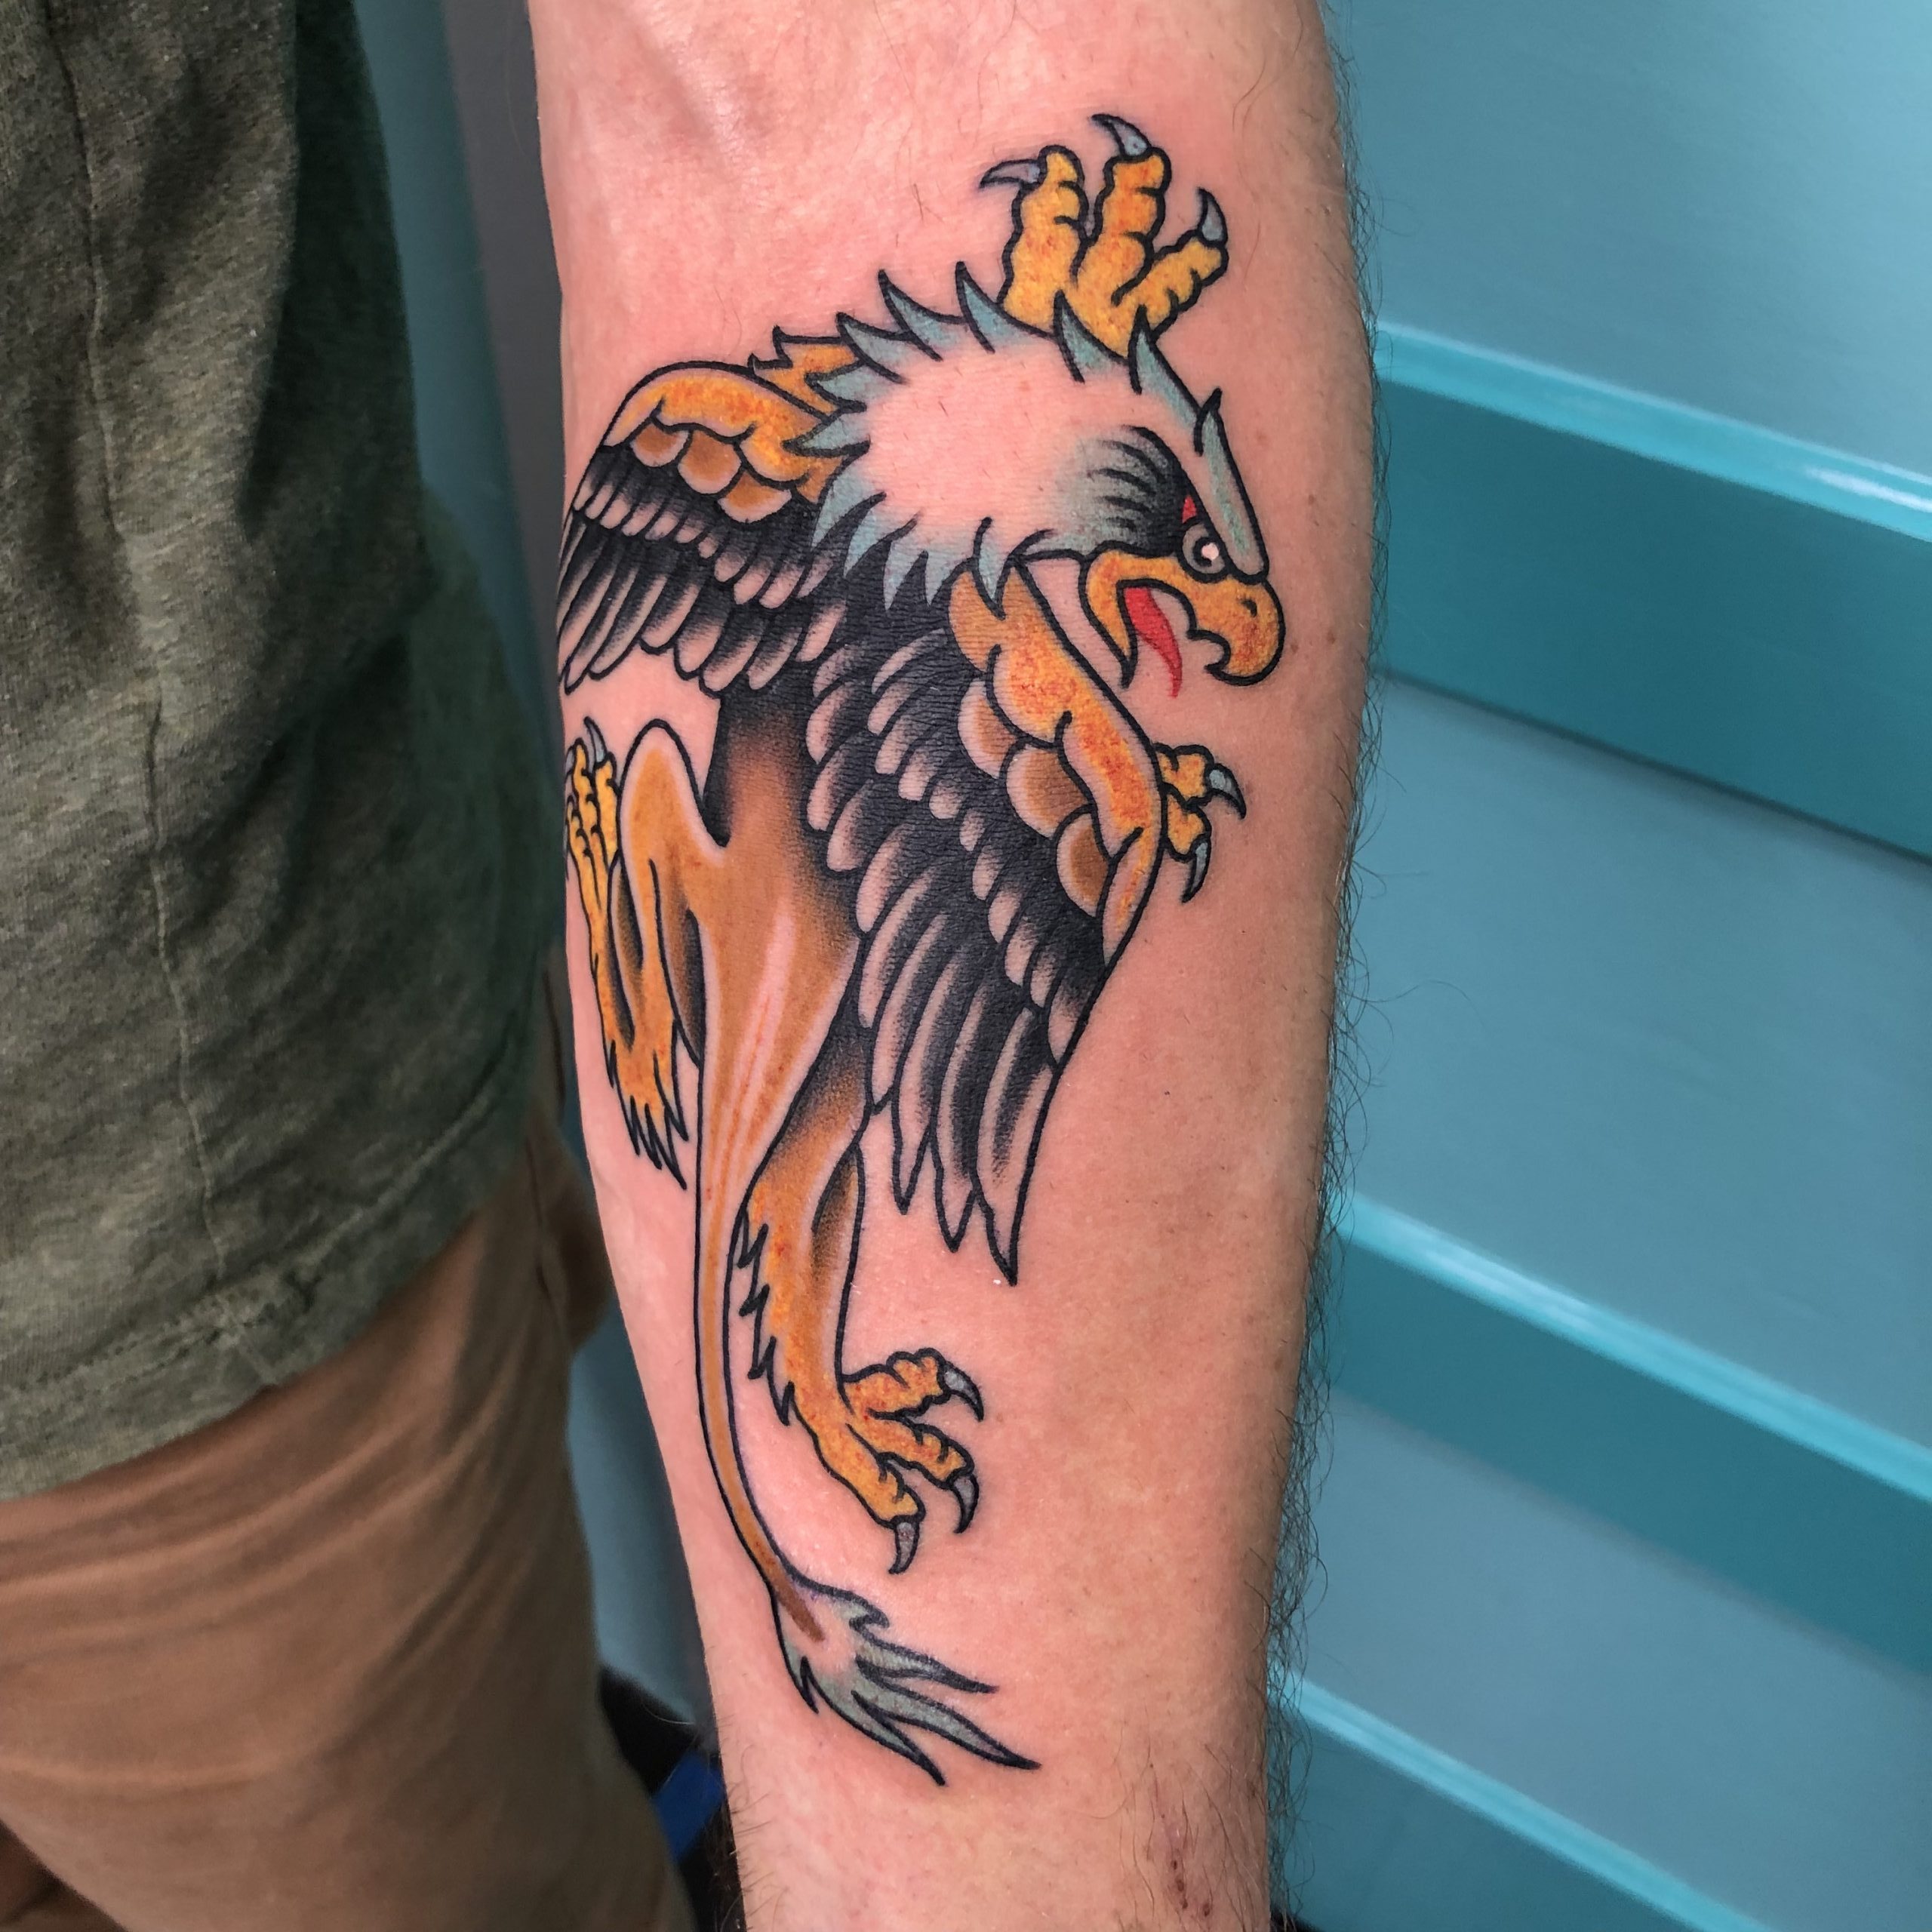 Adamo tattooer  Neo traditional griffin thank you Nick  Facebook